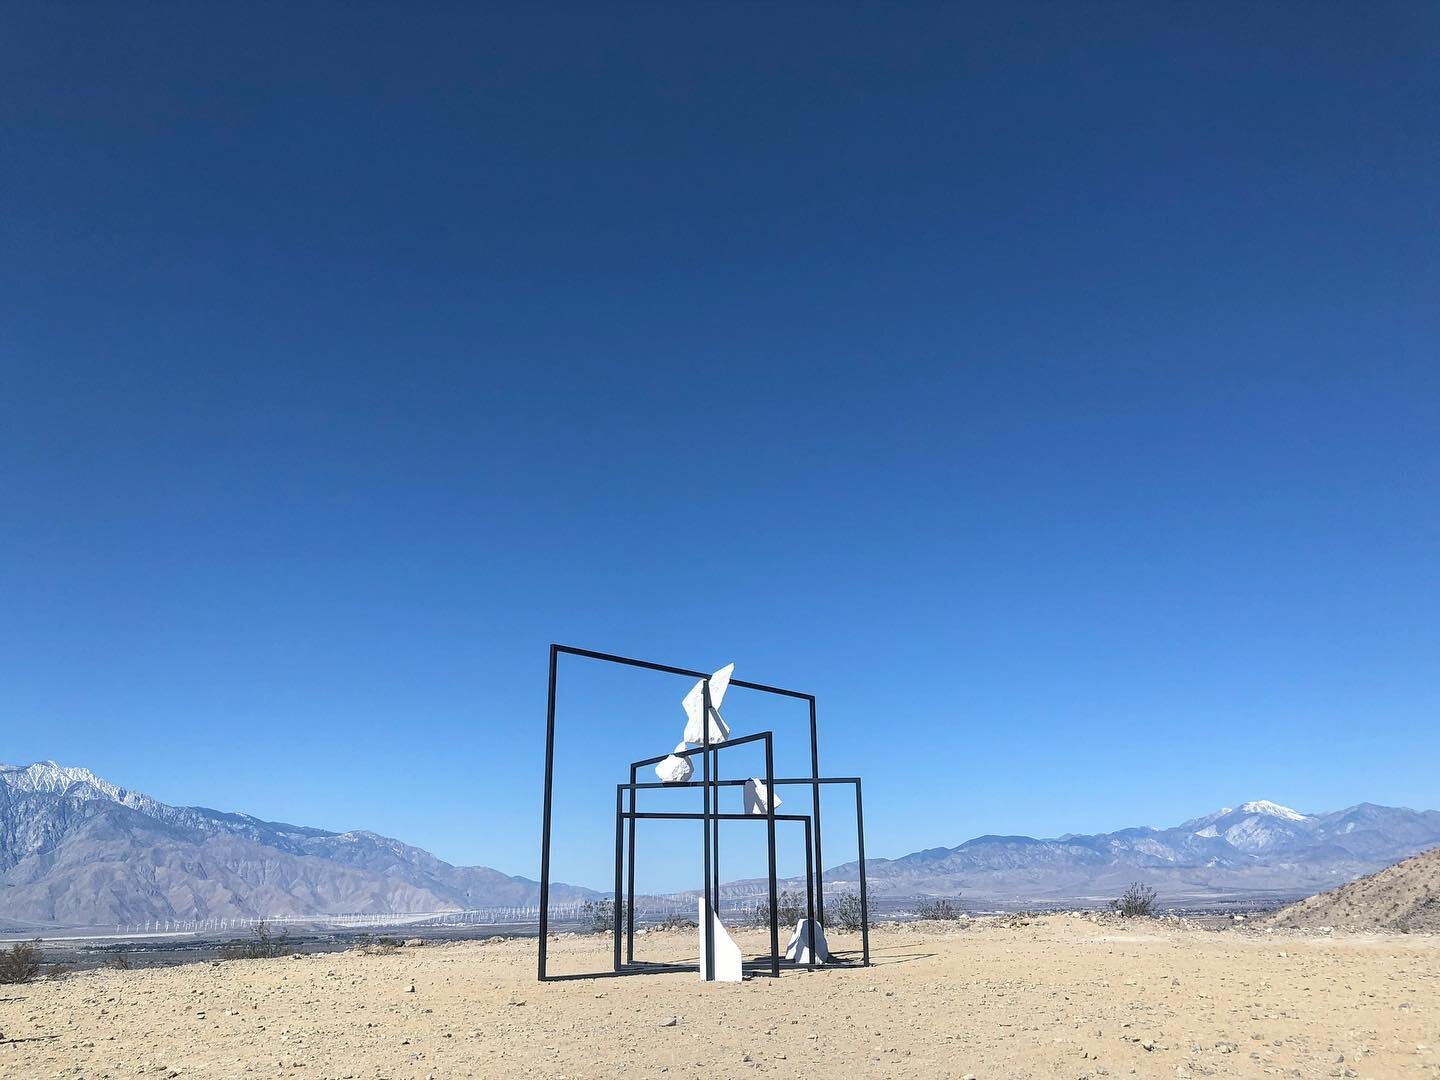 #chasingart #desertruns Thank you @_desertx You&rsquo;ve been kind. See you soon!